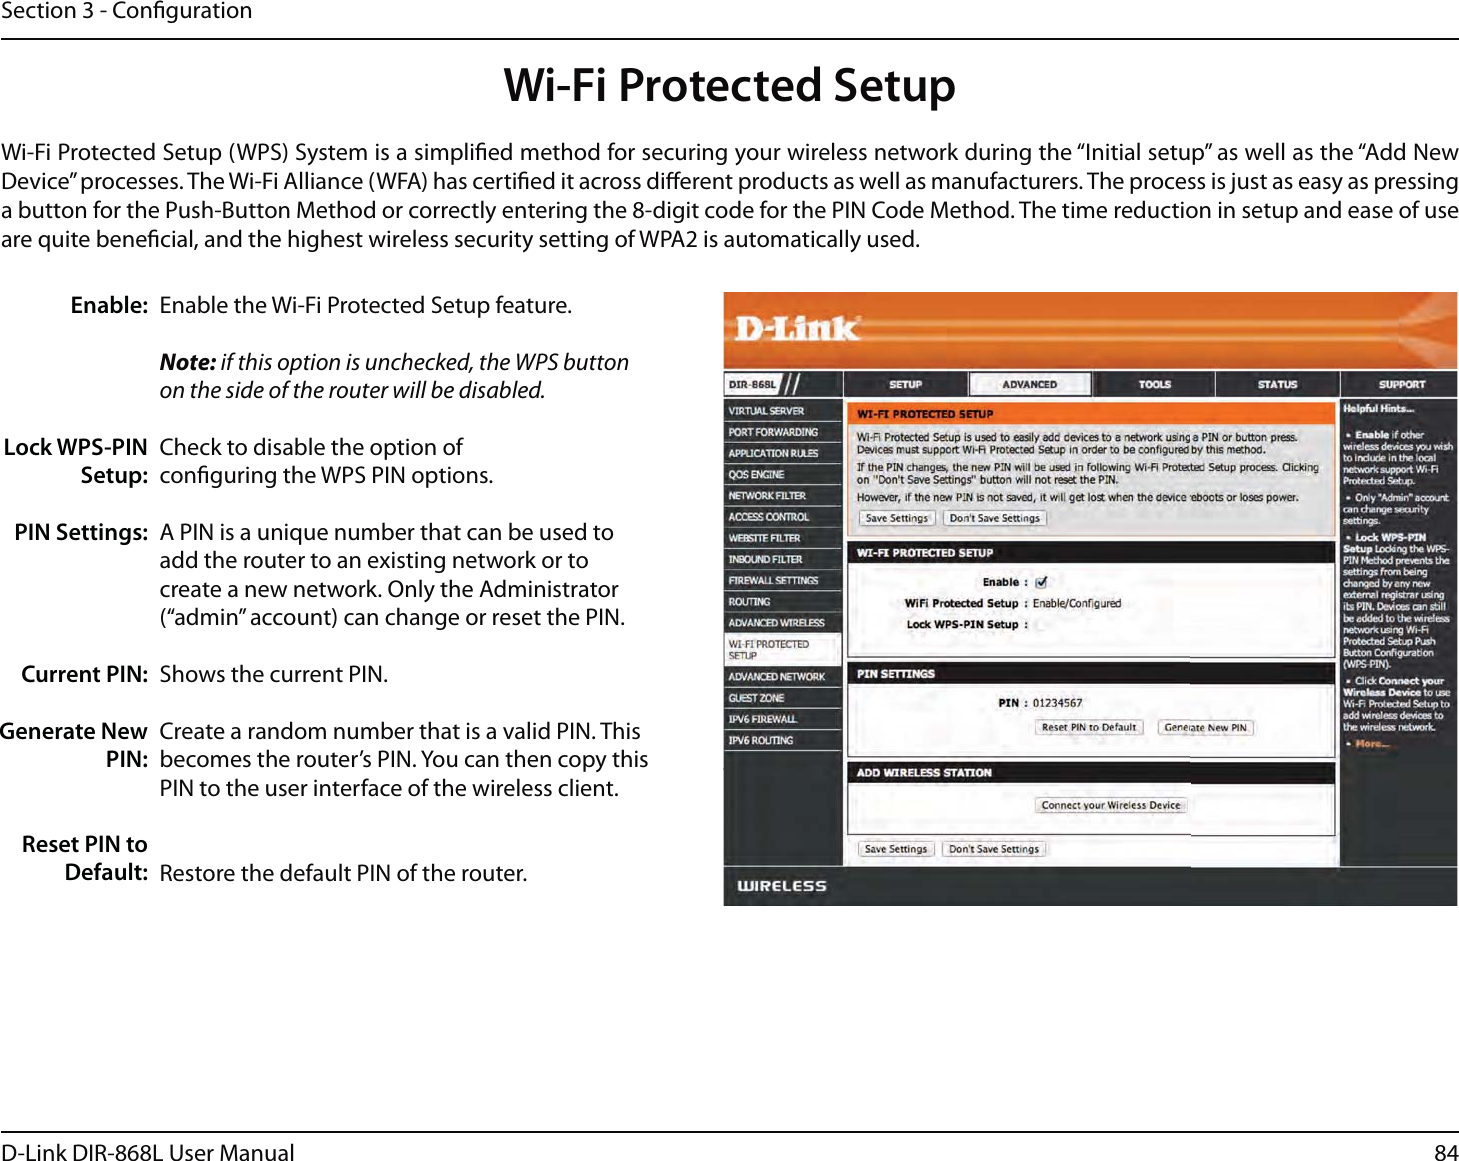 84D-Link DIR-868L User ManualSection 3 - CongurationWi-Fi Protected SetupEnable the Wi-Fi Protected Setup feature. Note: if this option is unchecked, the WPS button on the side of the router will be disabled.Check to disable the option of conguring the WPS PIN options.A PIN is a unique number that can be used to add the router to an existing network or to create a new network. Only the Administrator (“admin” account) can change or reset the PIN. Shows the current PIN. Create a random number that is a valid PIN. This becomes the router’s PIN. You can then copy this PIN to the user interface of the wireless client.Restore the default PIN of the router. Enable:Lock WPS-PIN Setup:PIN Settings:Current PIN:Generate New PIN:Reset PIN to Default:Wi-Fi Protected Setup (WPS) System is a simplied method for securing your wireless network during the “Initial setup” as well as the “Add New Device” processes. The Wi-Fi Alliance (WFA) has certied it across dierent products as well as manufacturers. The process is just as easy as pressing a button for the Push-Button Method or correctly entering the 8-digit code for the PIN Code Method. The time reduction in setup and ease of use are quite benecial, and the highest wireless security setting of WPA2 is automatically used.